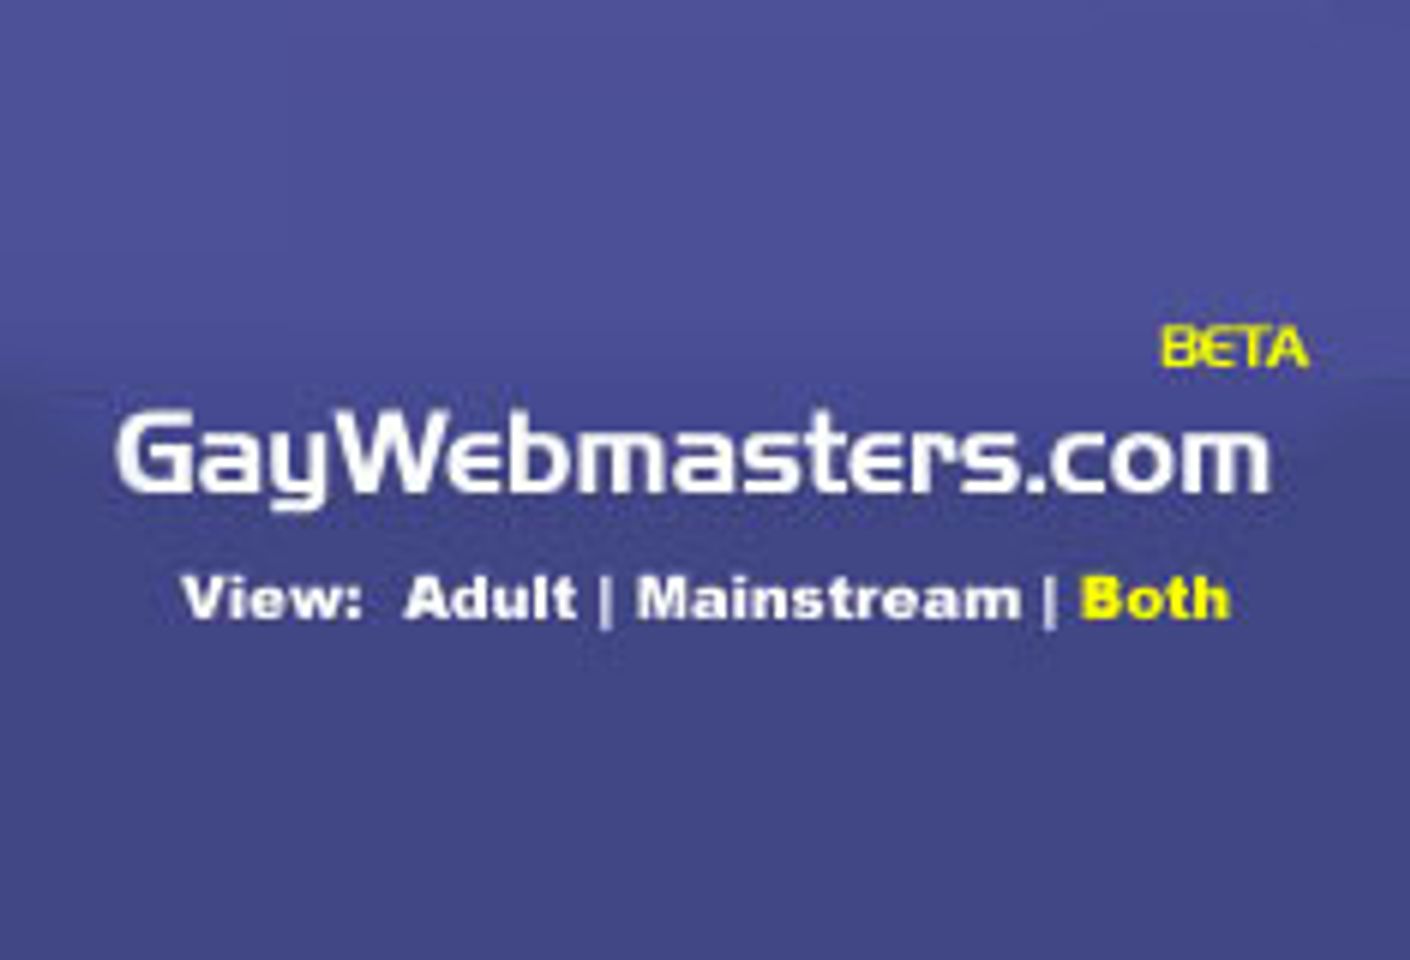 Win $1,000 From GayWebmasters.com